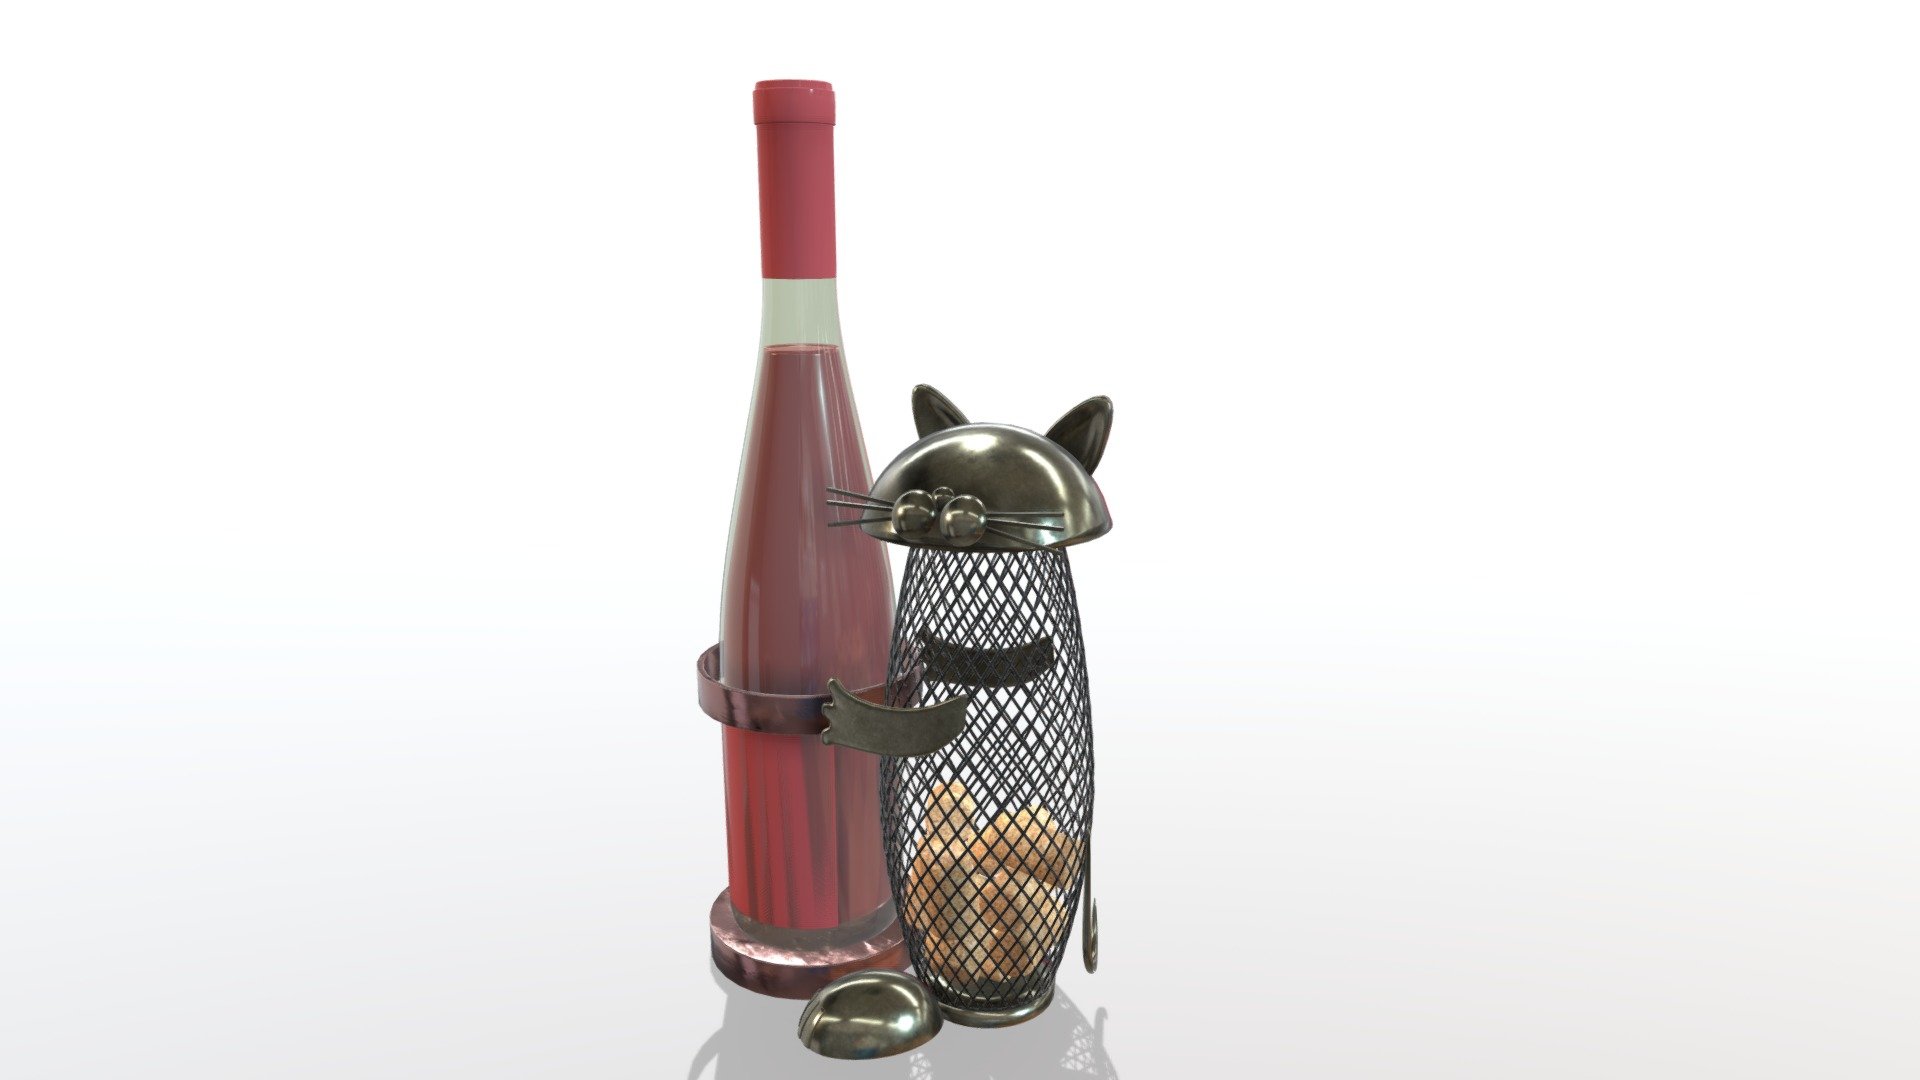 It's high quality model, that has good textures and resolution. This unique wine holder will decorate any interior. You also can find many interesting products, just click on my username to see complete gallery 3d model